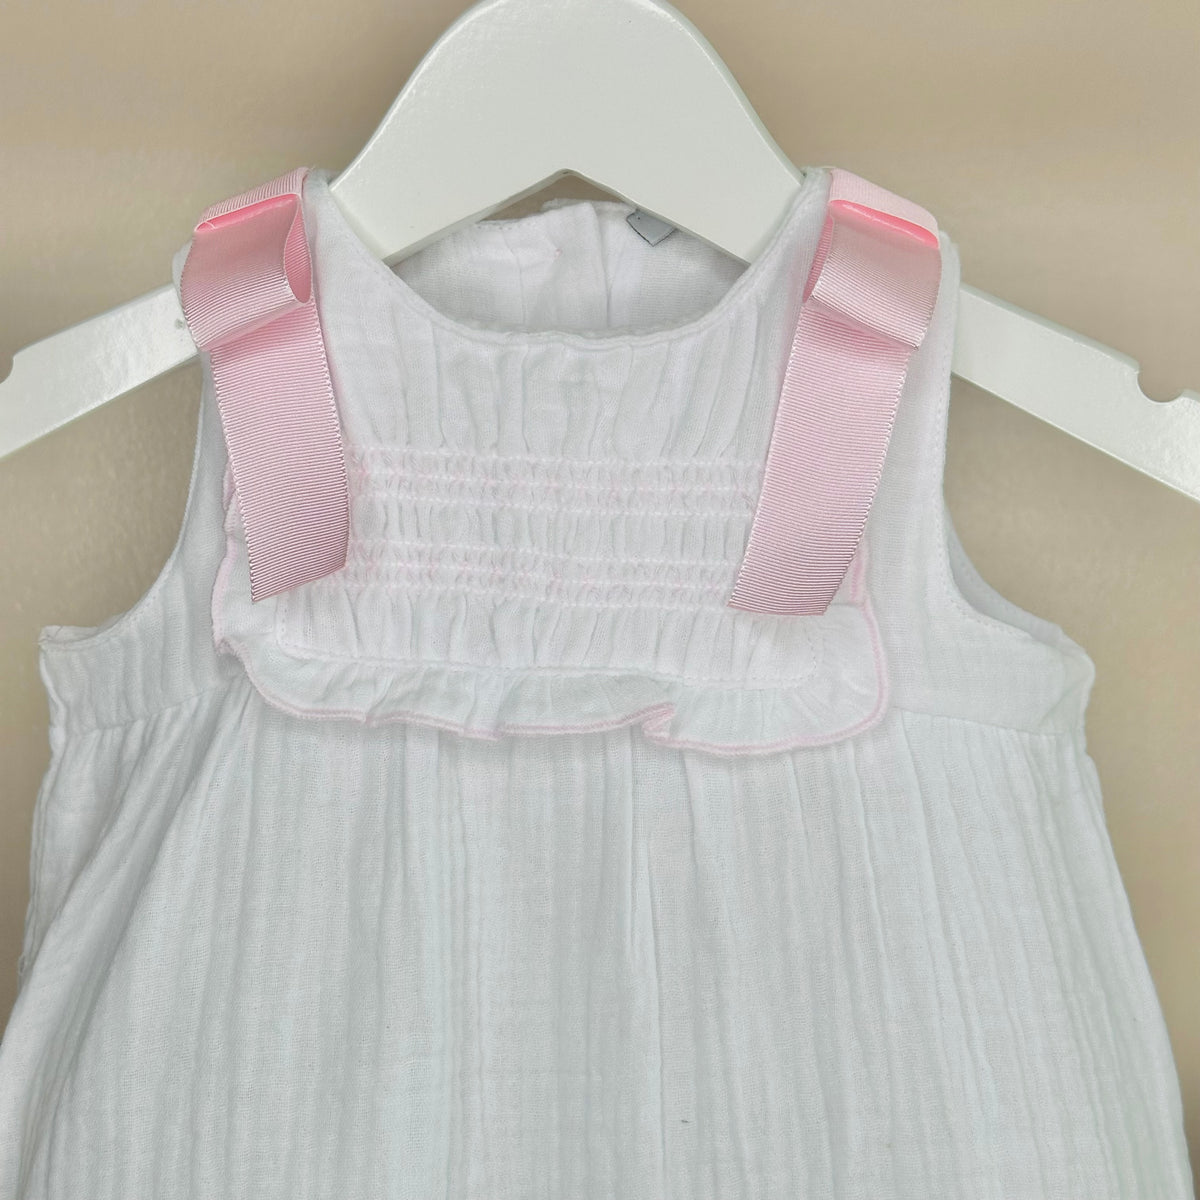 White Cheesecloth Shortie Romper With Pink Bows